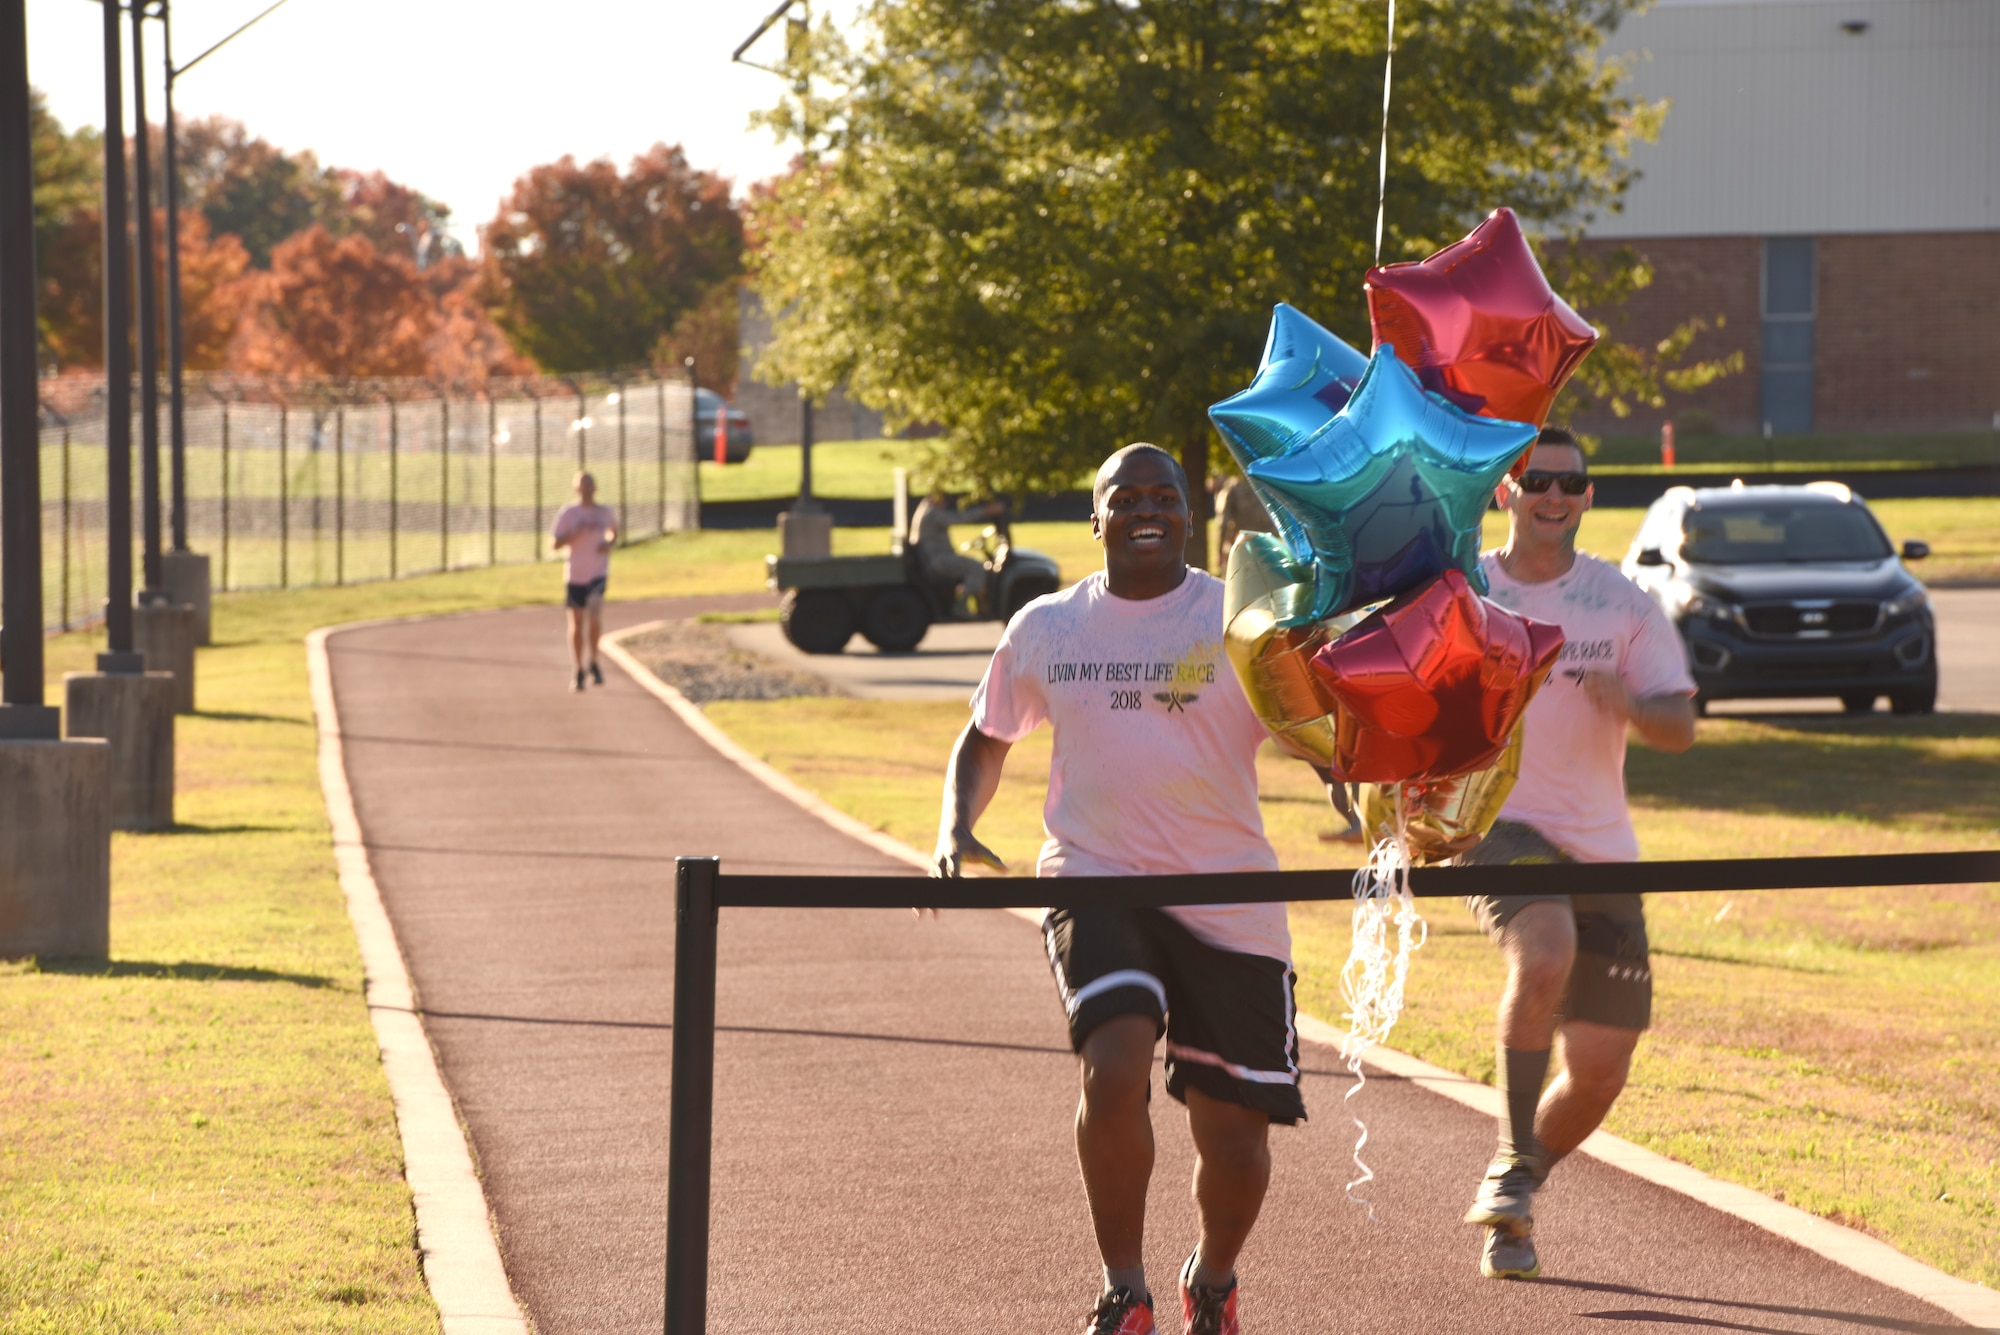 Members of the 145th Airlift Wing, sprint towards the finish line during a ‘Living’ My Best Life’ Color Race, held at the North Carolina Air National Guard (NCANG) Base, Charlotte Douglas International Airport, Nov. 3, 2018. The Color Run, put together by the NCANG Recruiting Office, honors recently deceased U.S. Air Force Recruiter Master Sgt. Valanda Pettis, following her battle with cancer. Master Sgt. Pettis was believed by many to have a colorful personality and would often be heard singing, ‘Livin’ My Best Life,’ during the good and bad days; a true testament to her strength.